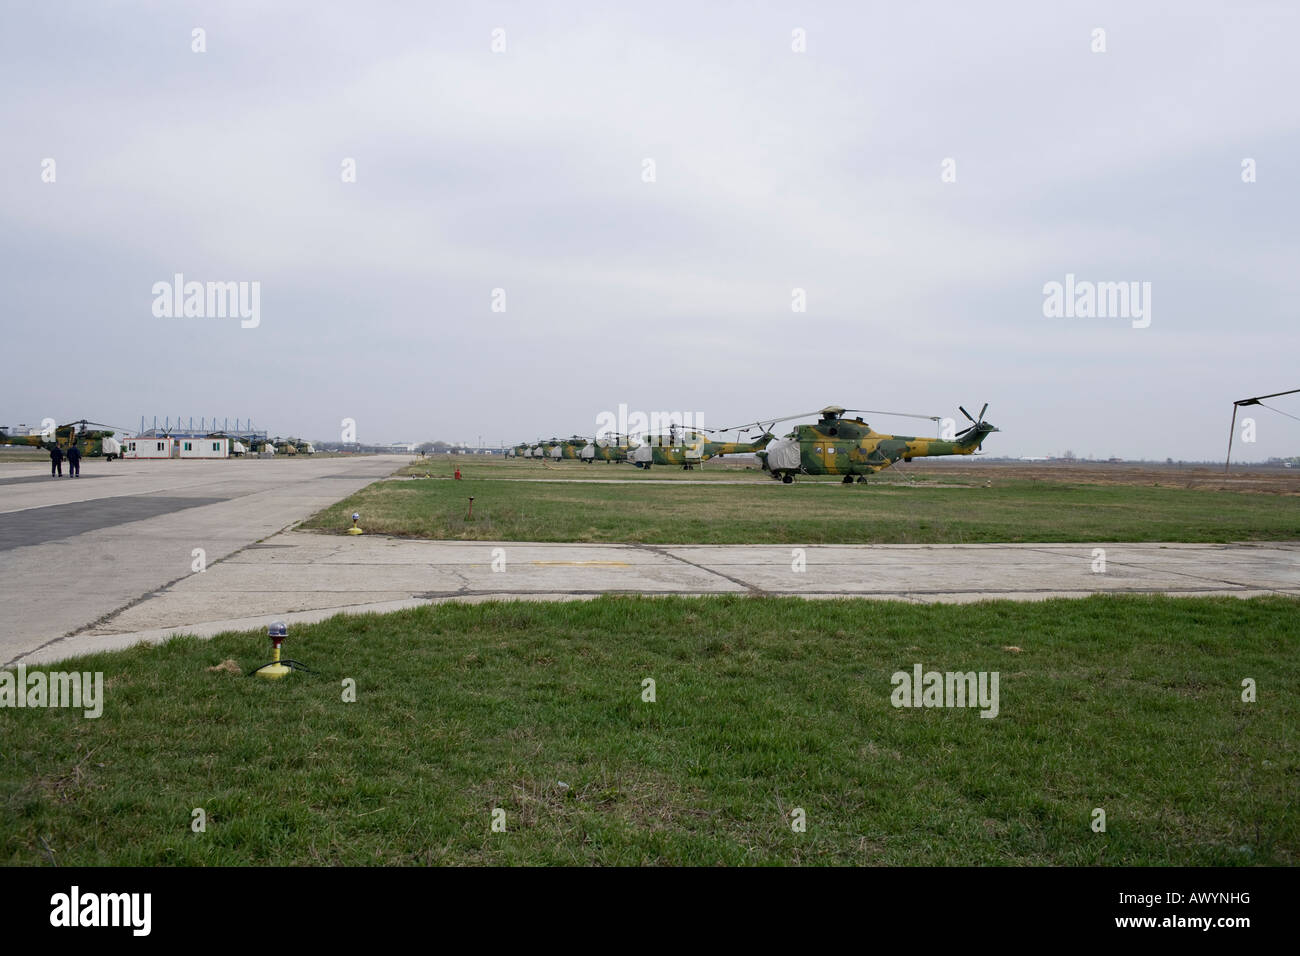 military helicopters parked near the runway Stock Photo